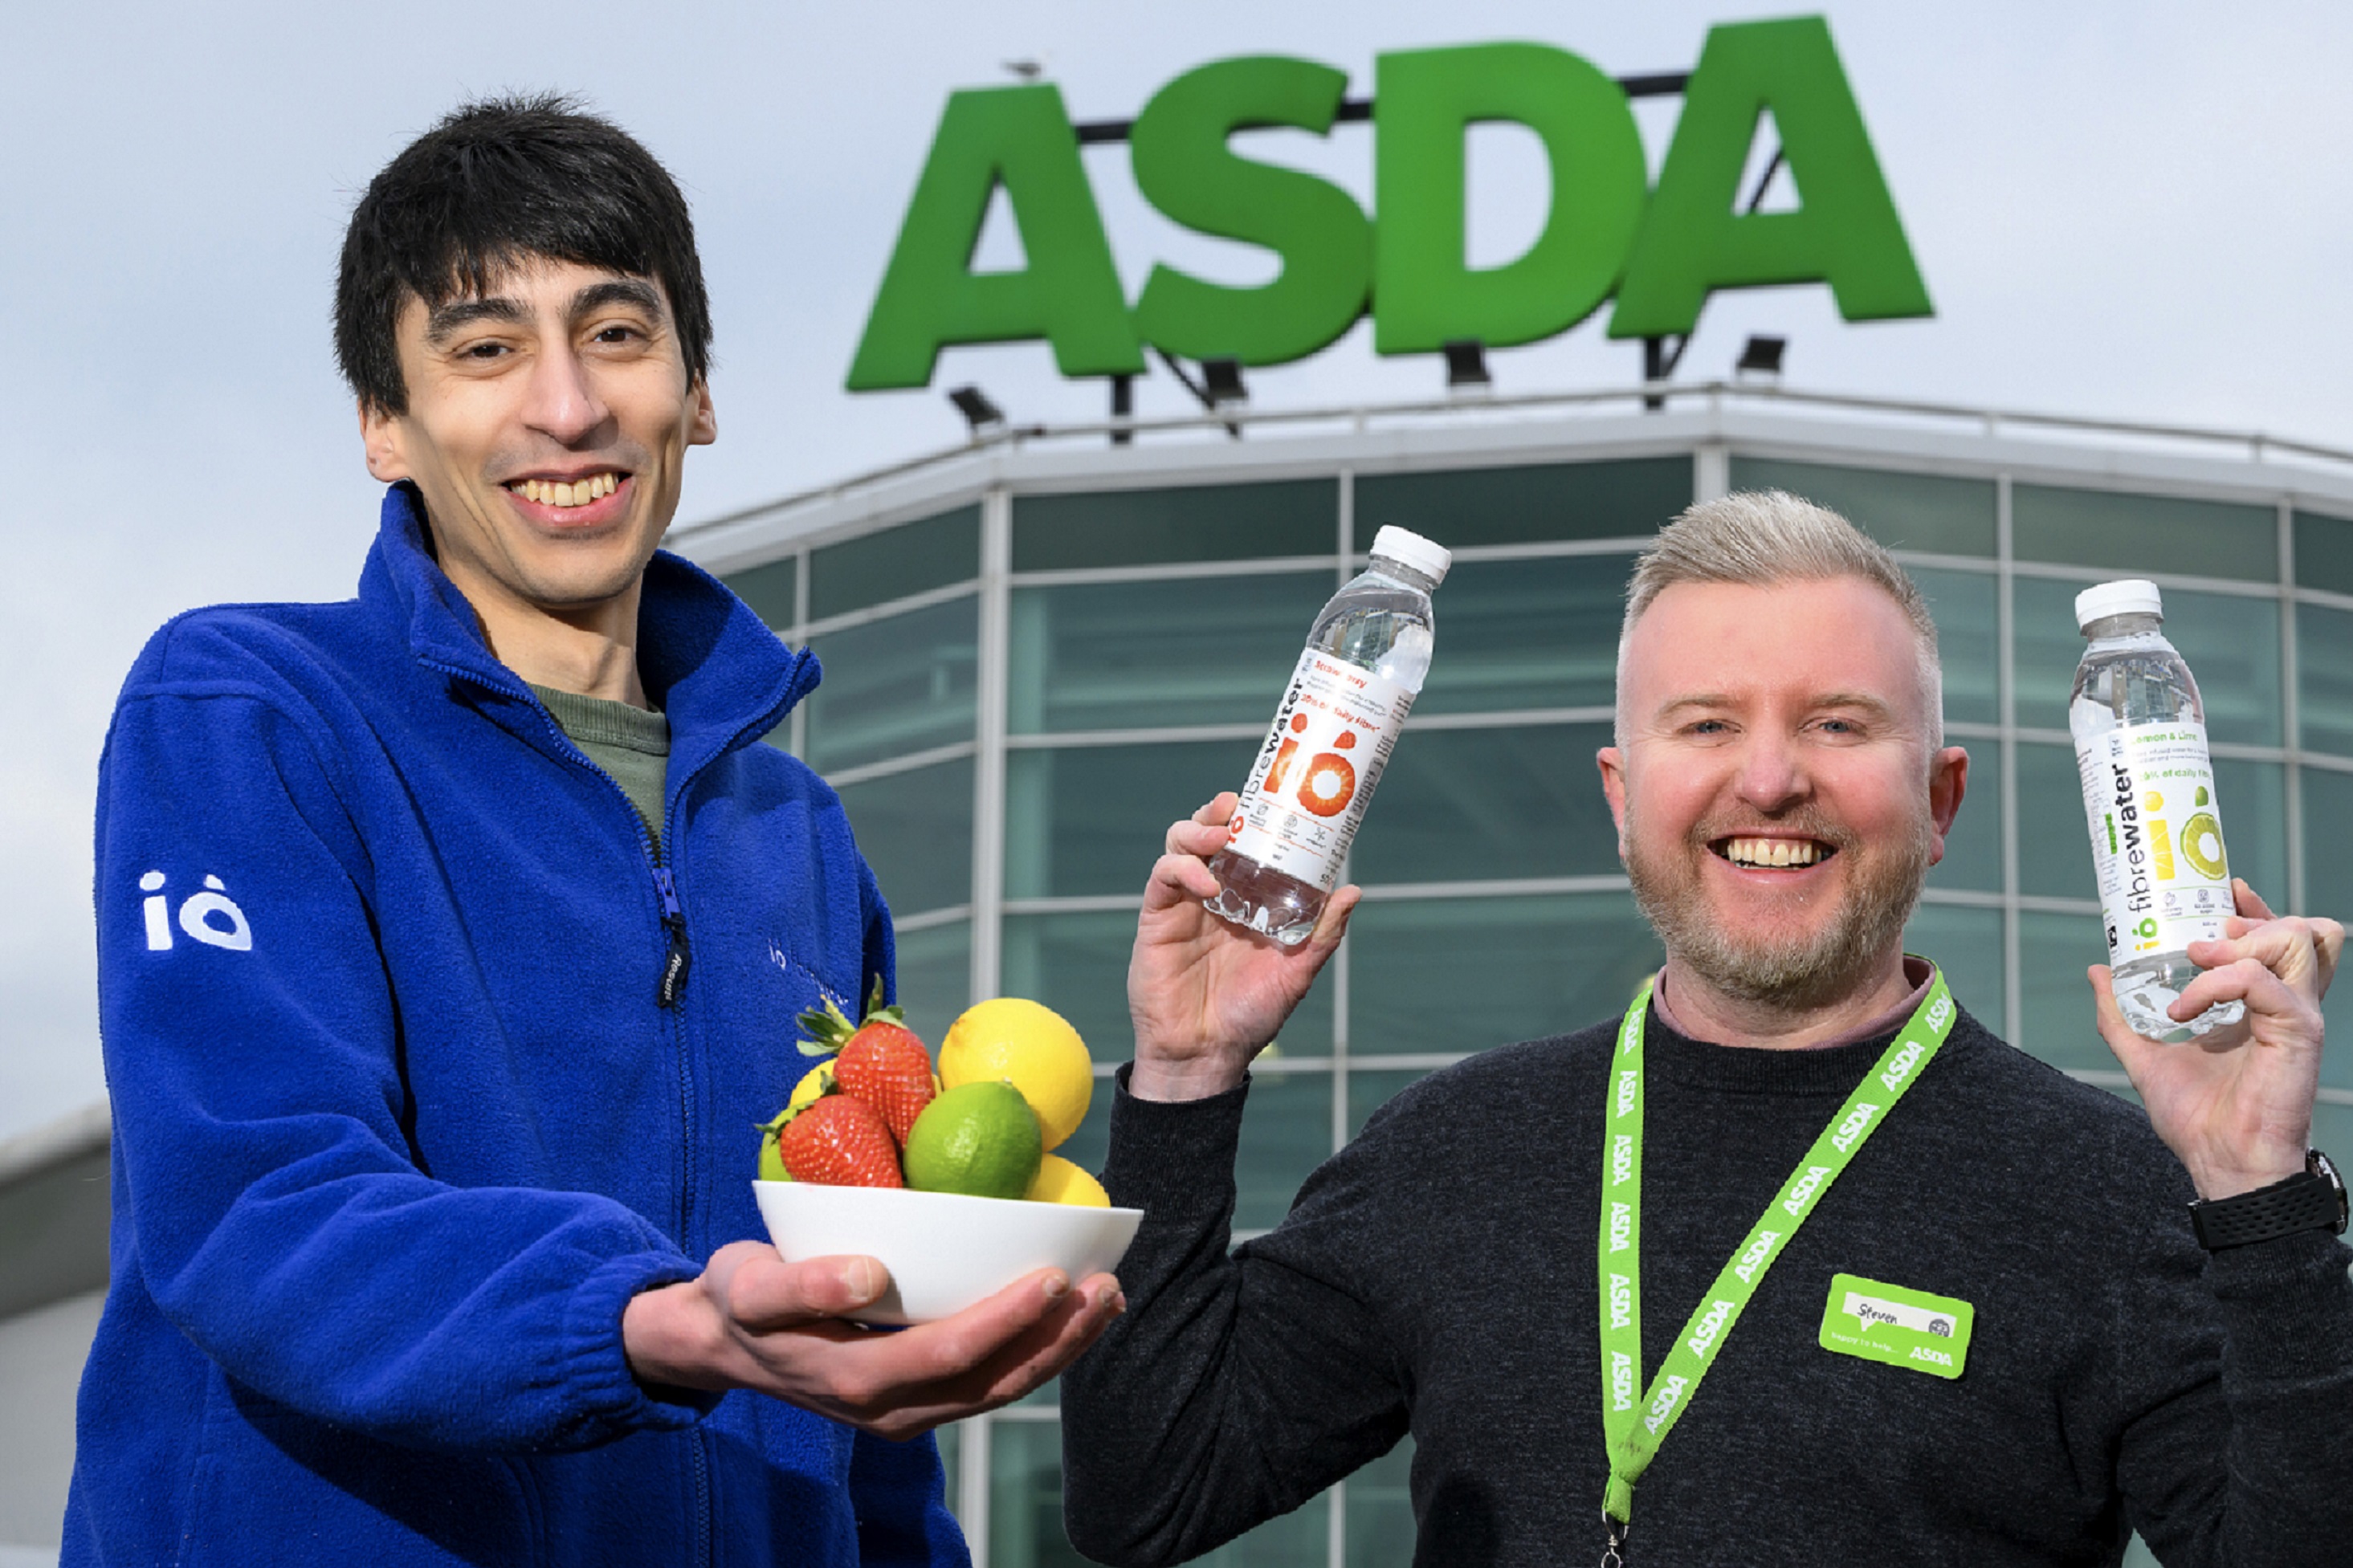 The move makes Asda the first major supermarket to stock the 'gut-loving prebiotic fibre-infused water'.